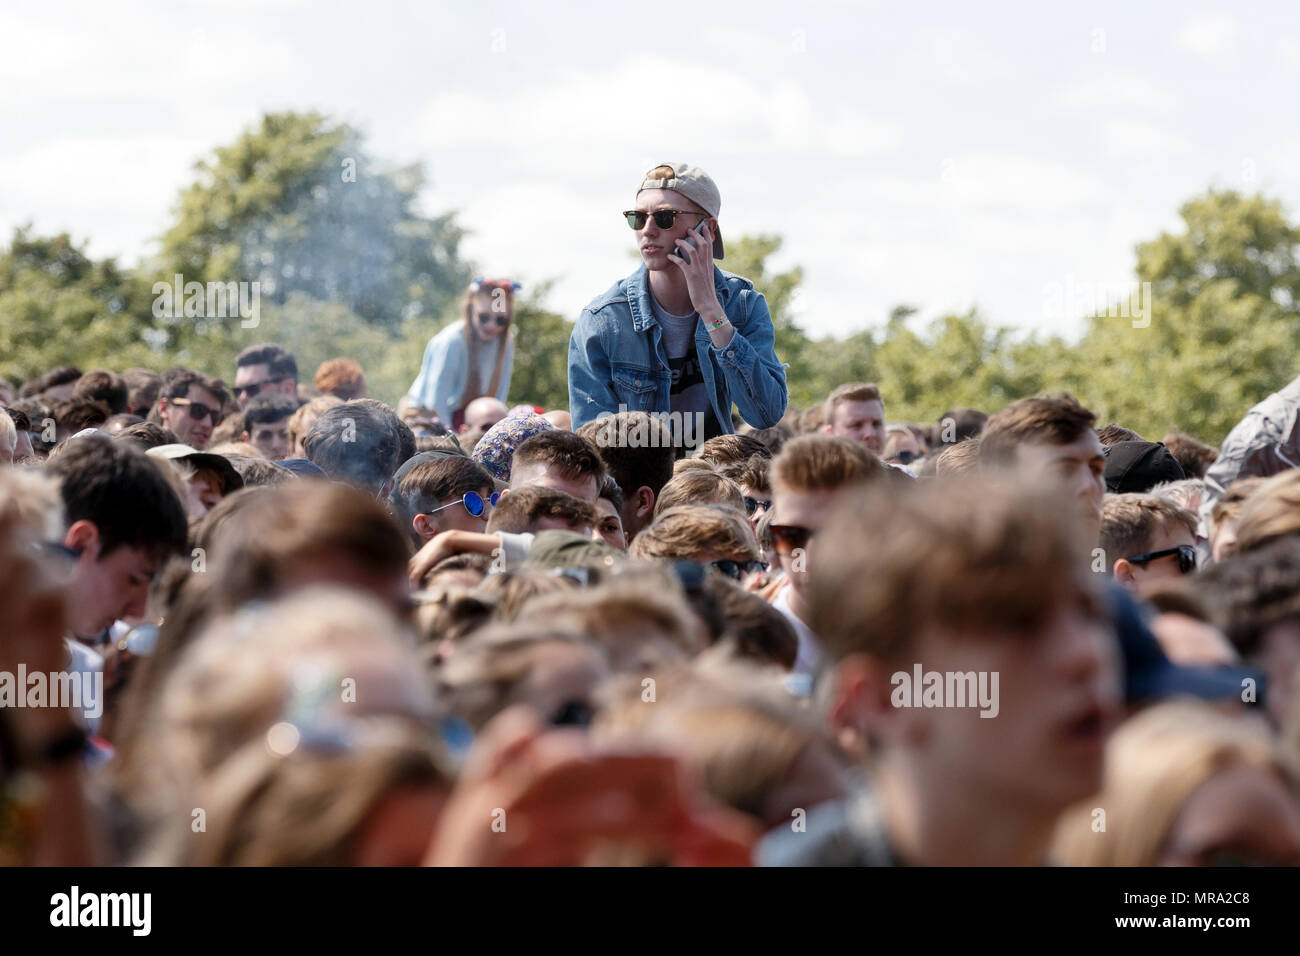 A young man on his phone while on a friend's shoulders at a music festival. Stock Photo